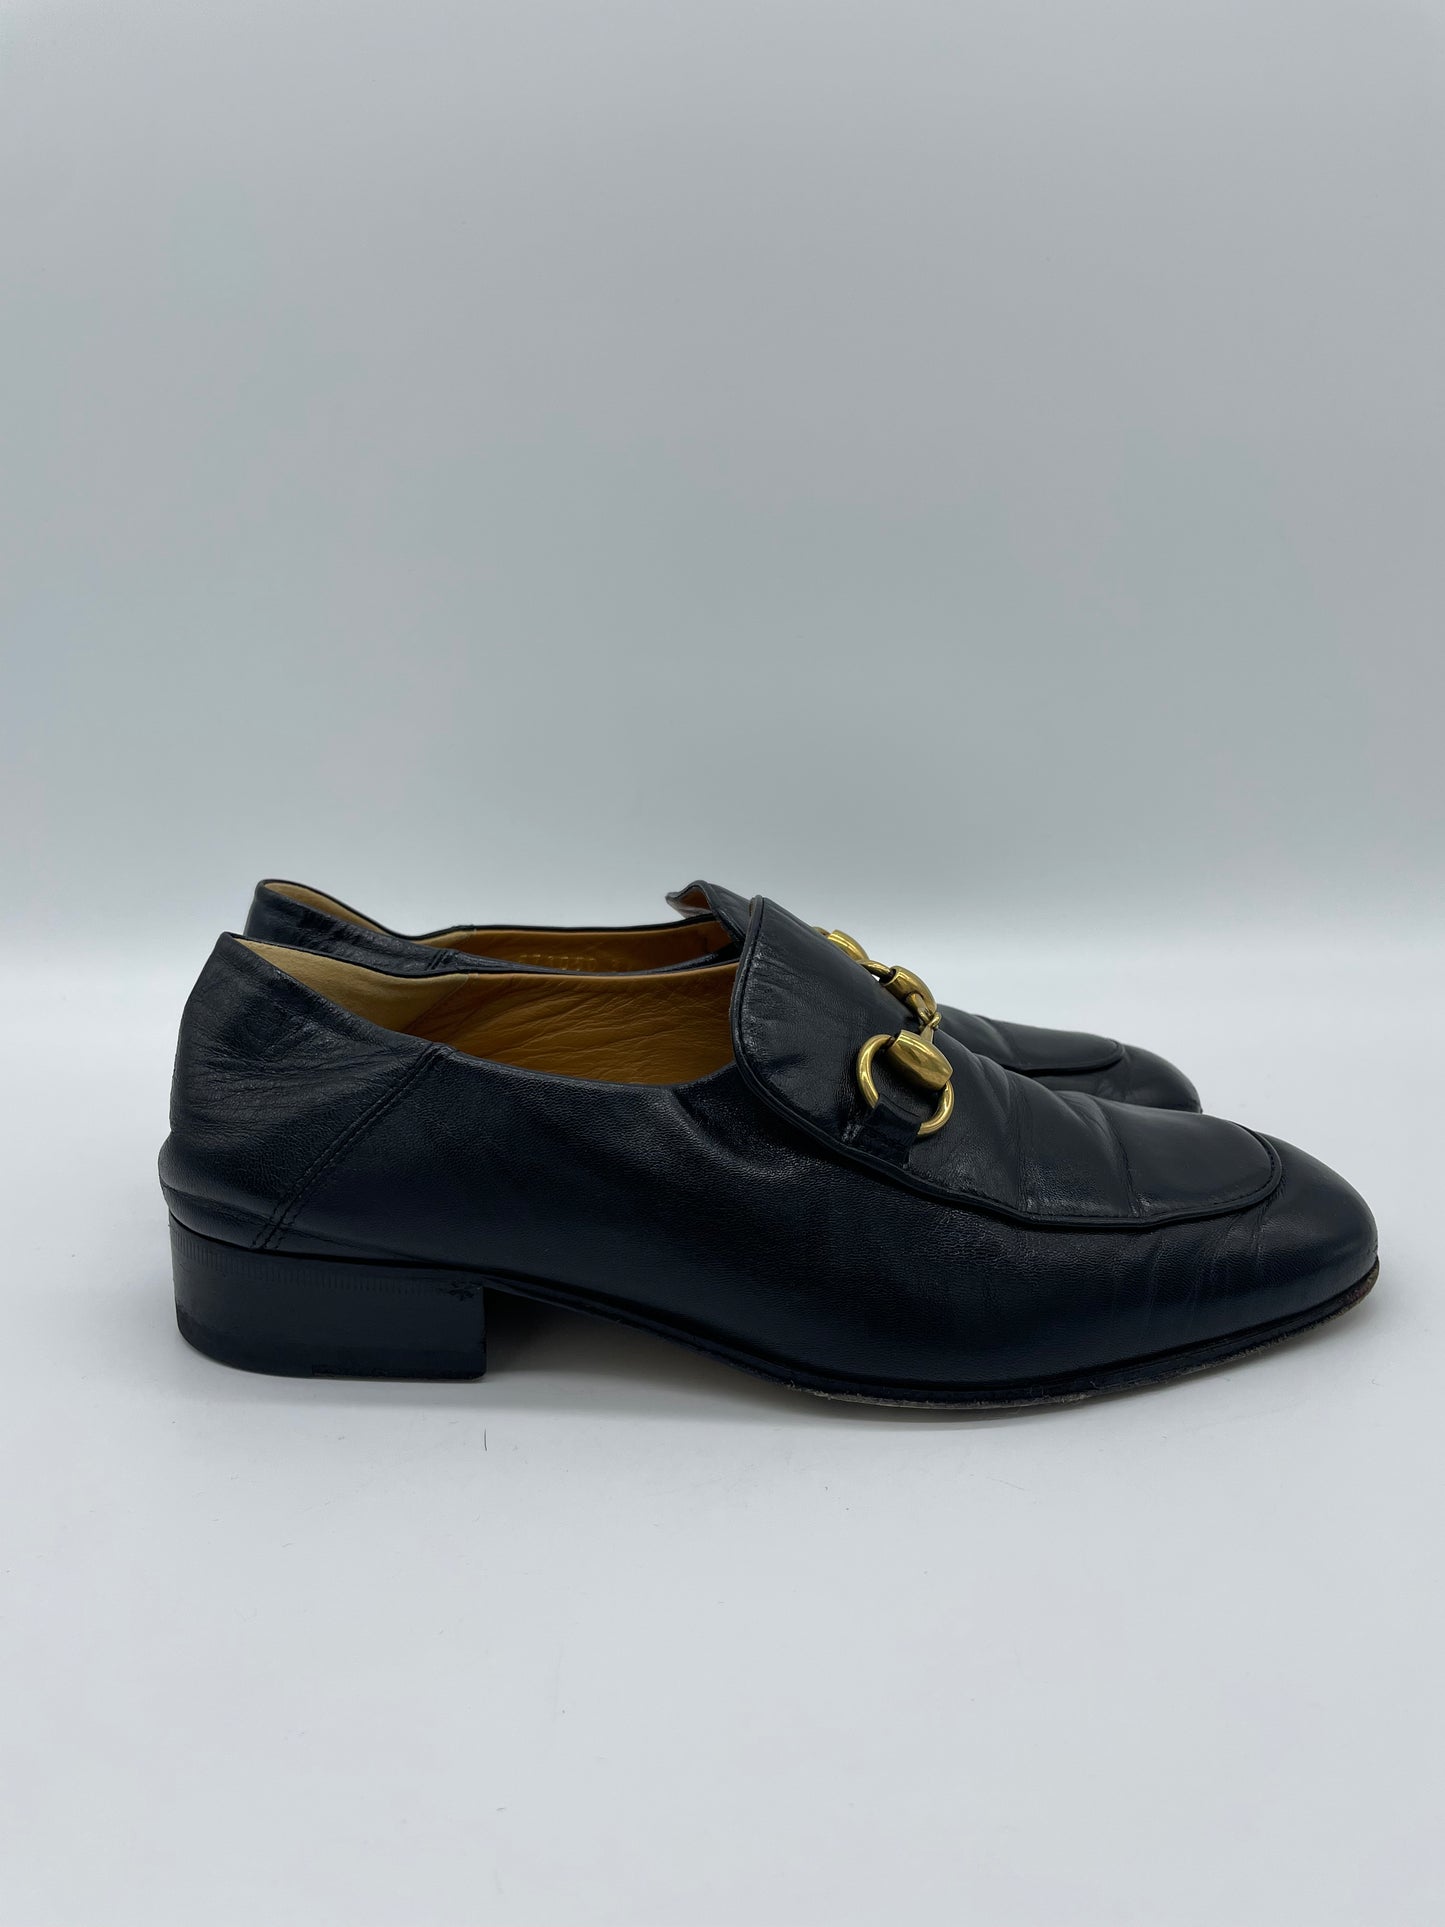 Gucci 1955 Horsebit Accent Leather Loafers